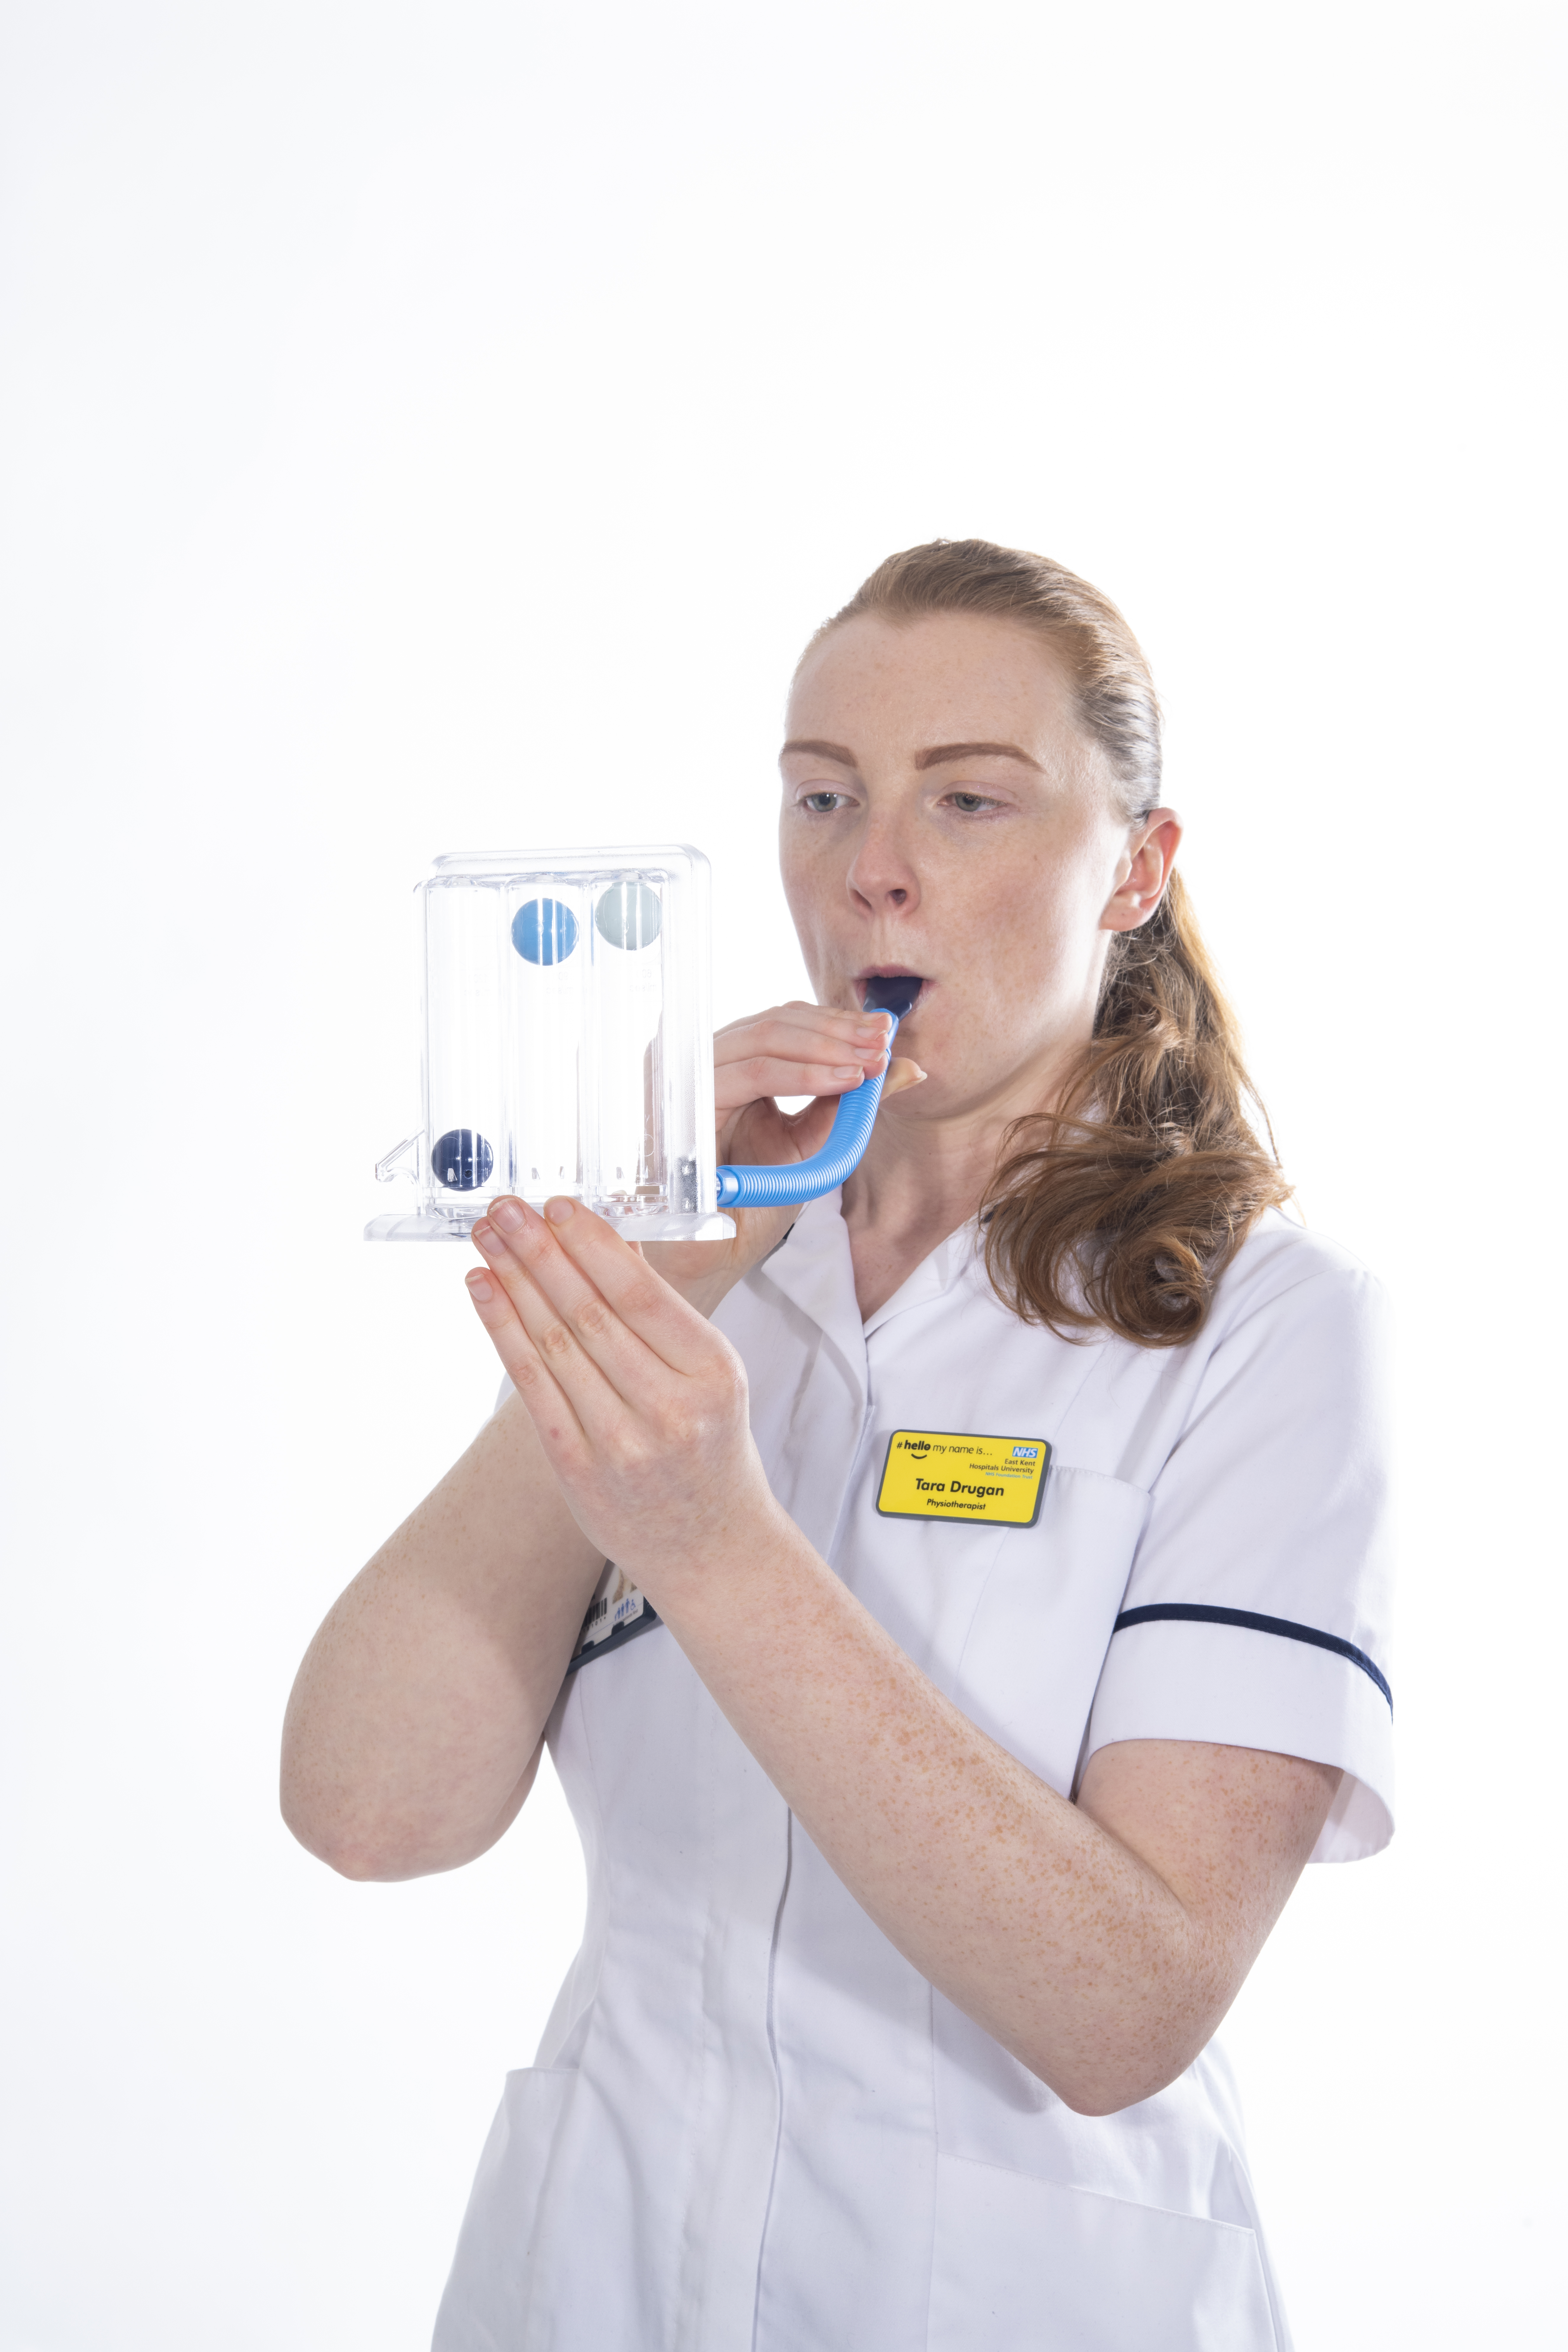 Blow into the incentive spirometer and make two balls rise